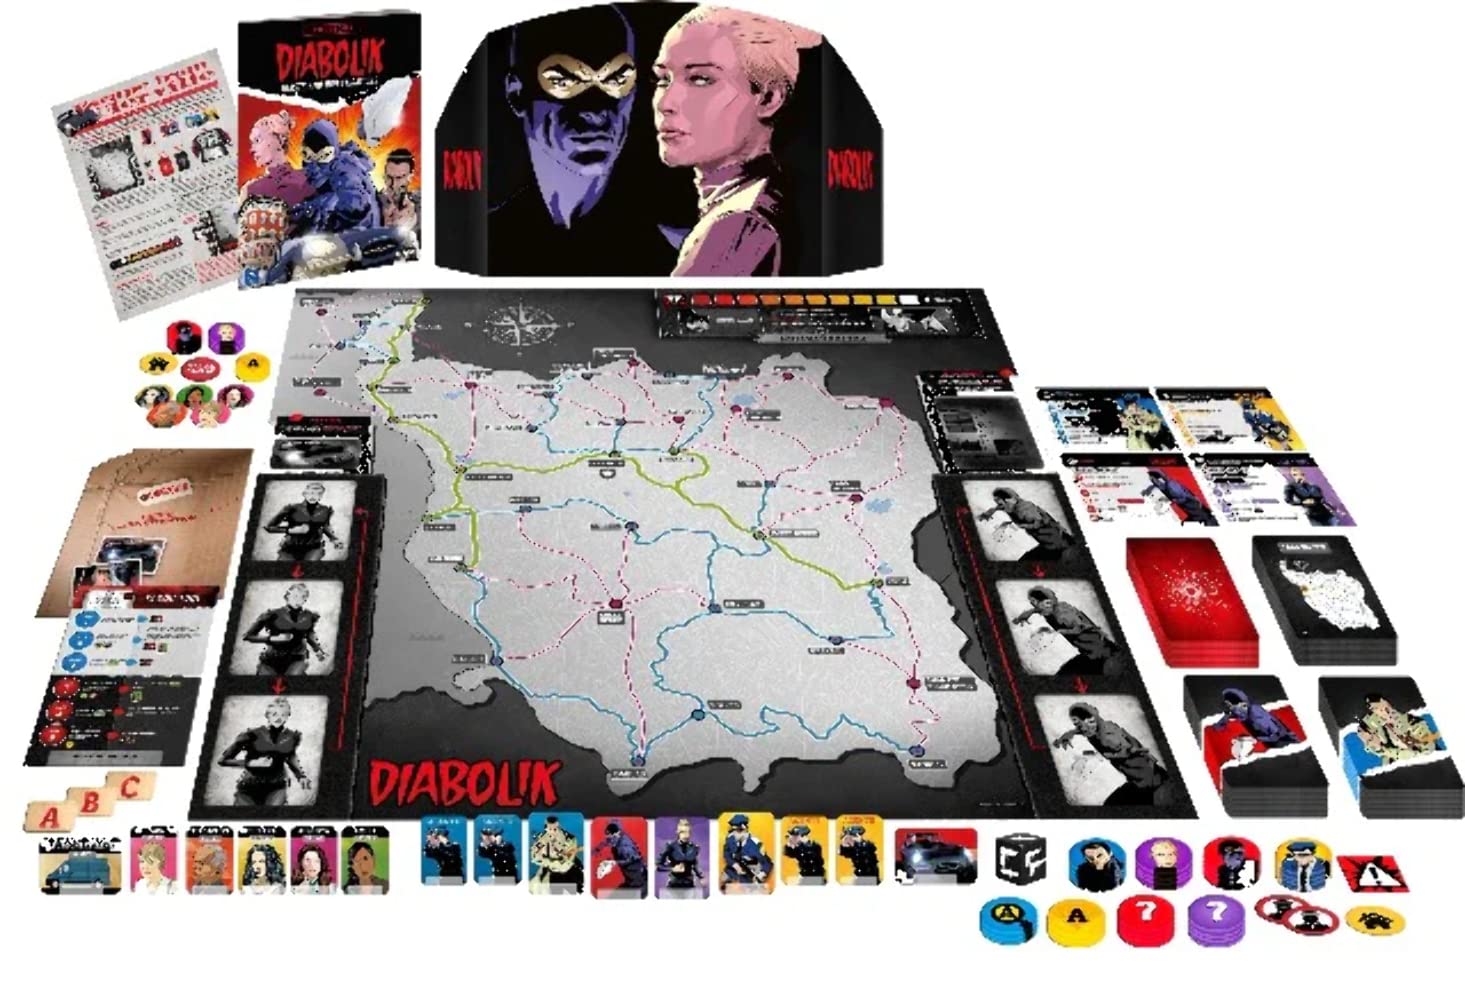 Diabolik: Heists and Investigations – A Board Game by Ares Games 2-4 Players – Board Games for Family 30-60 Minutes of Gameplay – Games for Family Game Night – for Teens and Adults Ages 14+ - English